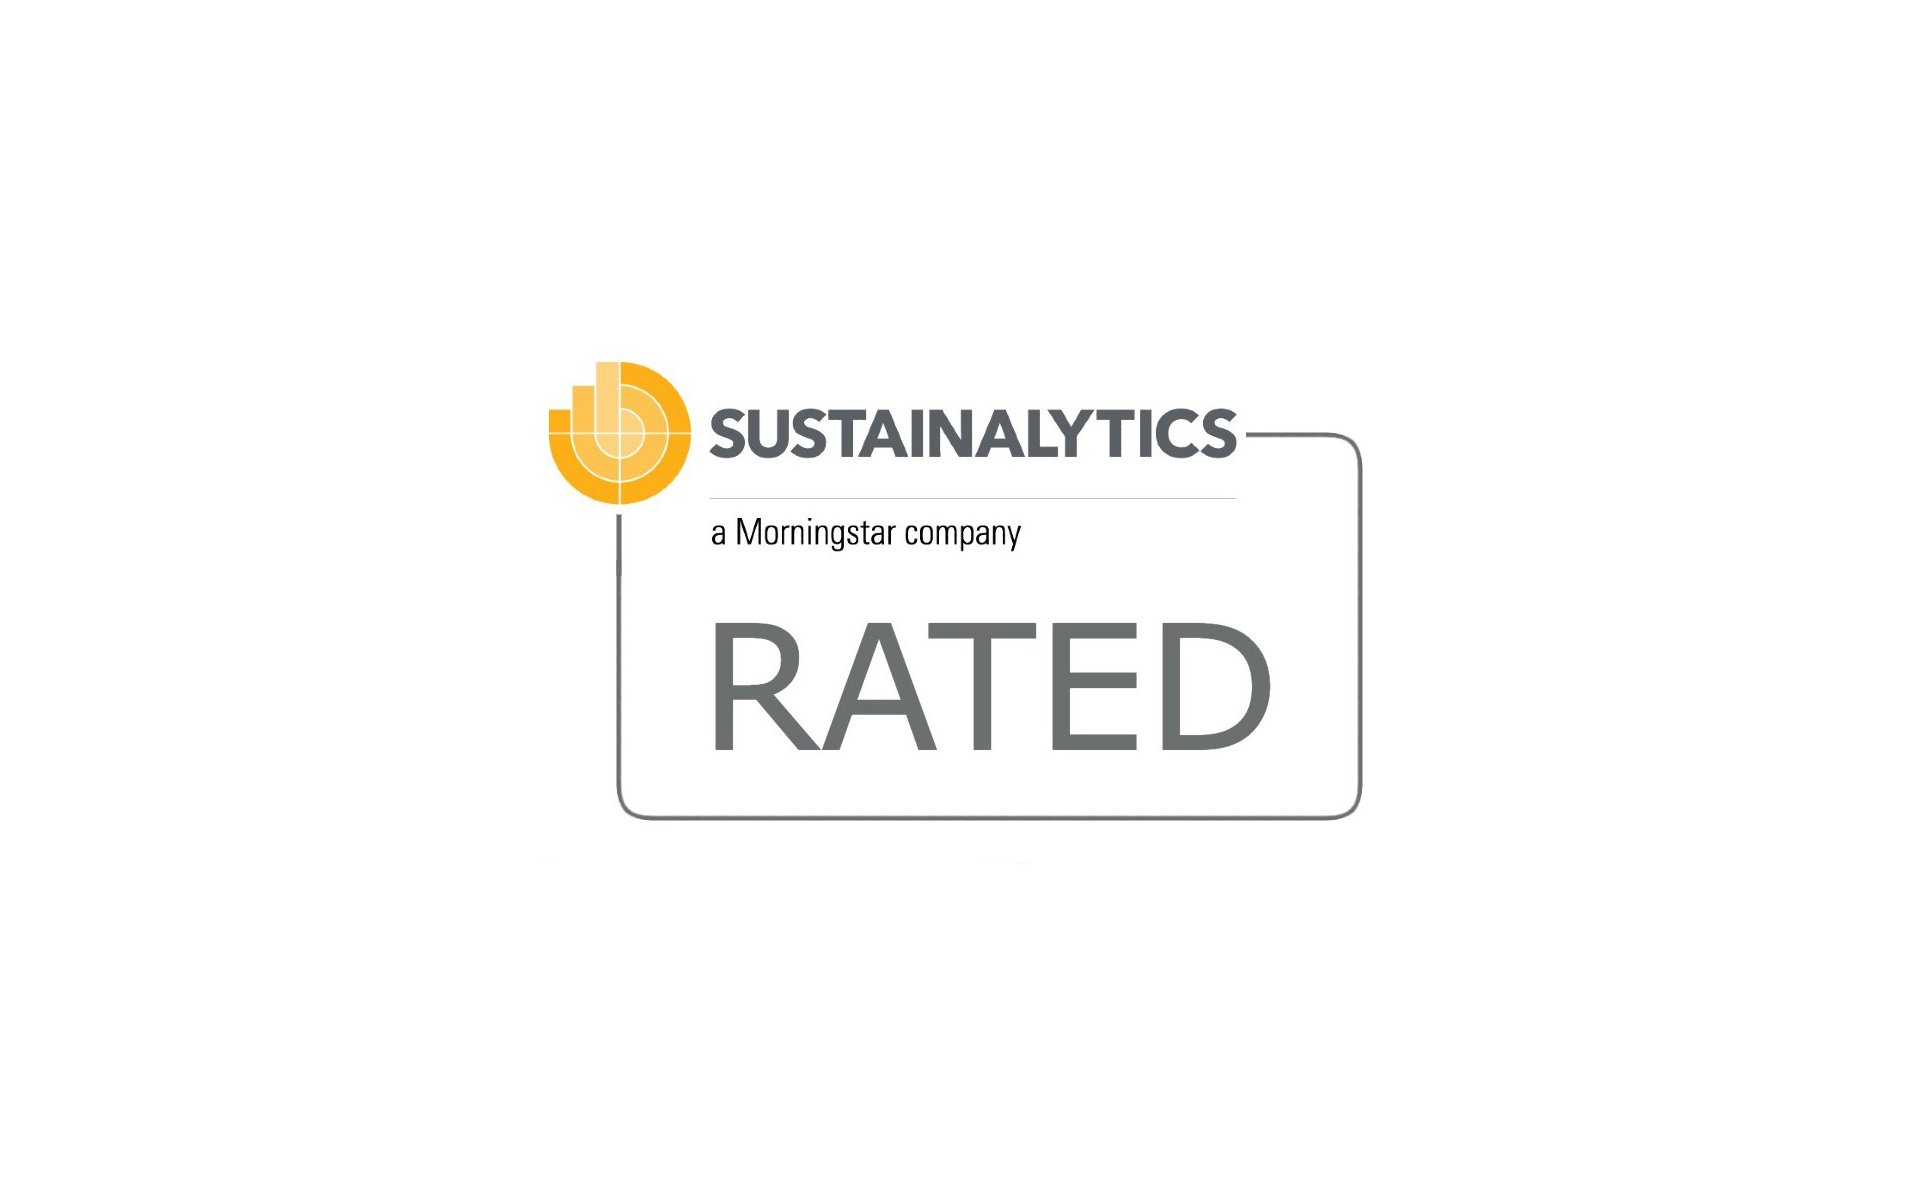 A logotype that says Sustainalitics a morningstar company rated